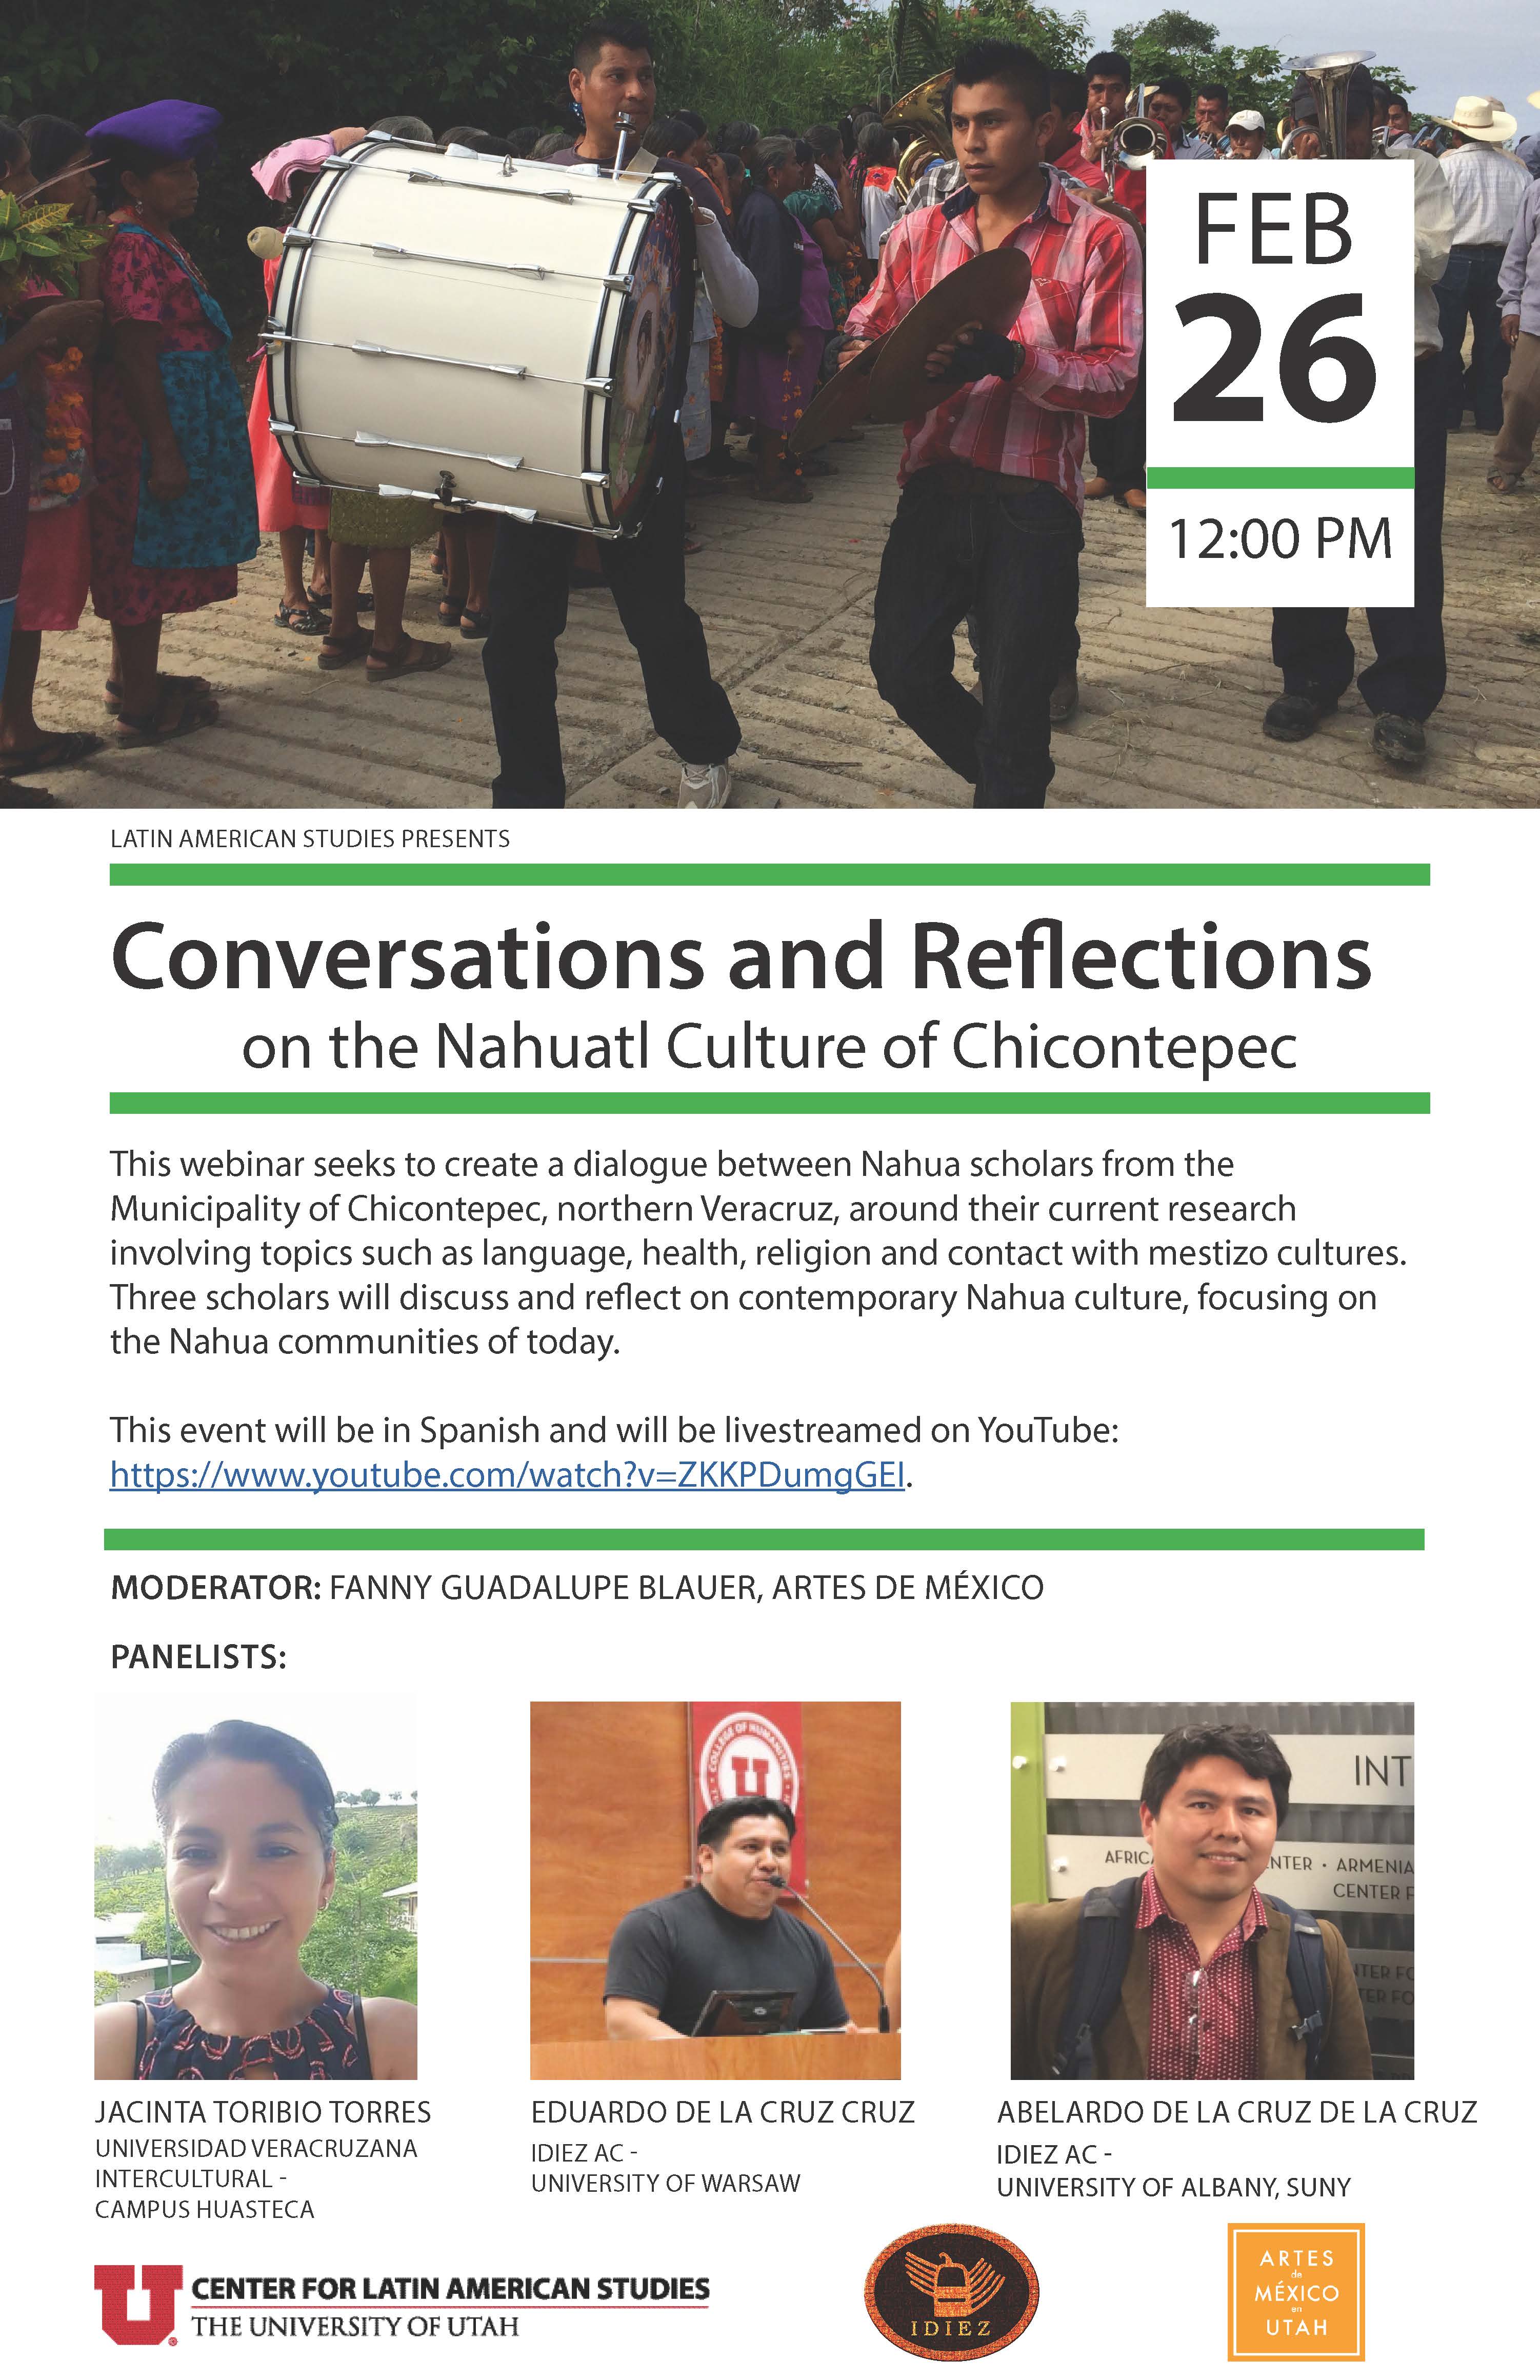 Conversations and Reflections on the Nahuatl Culture of Chicontepec